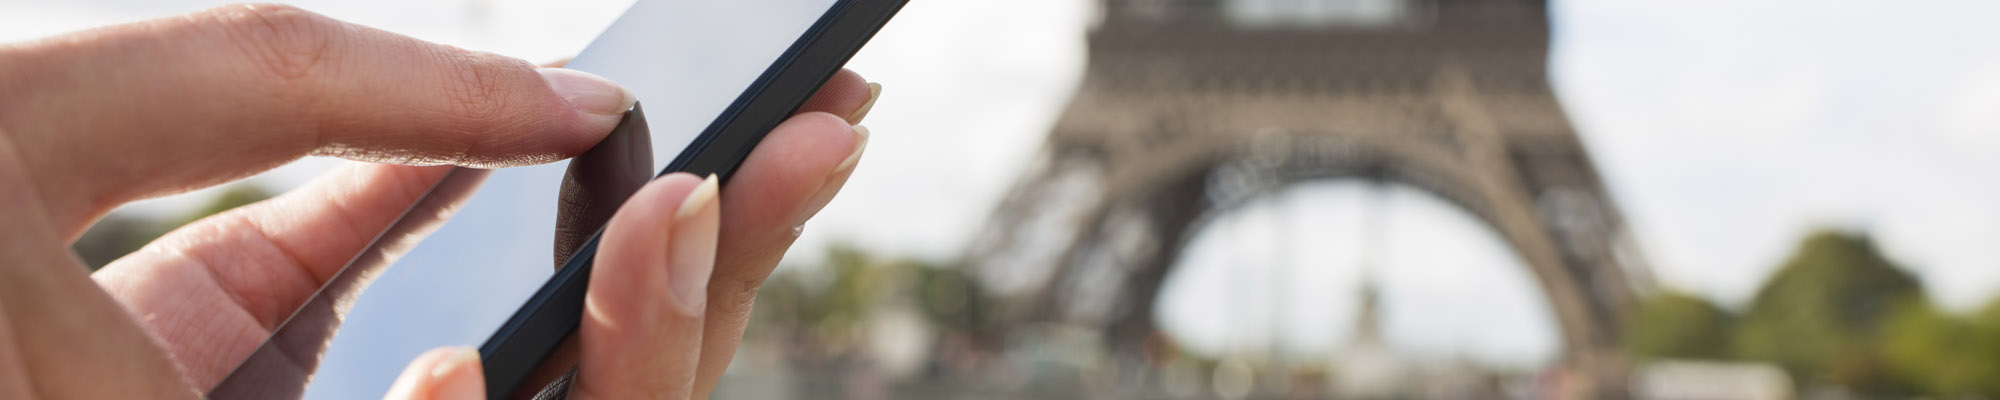 Woman using her mobile phone in front of eiffel tower photo